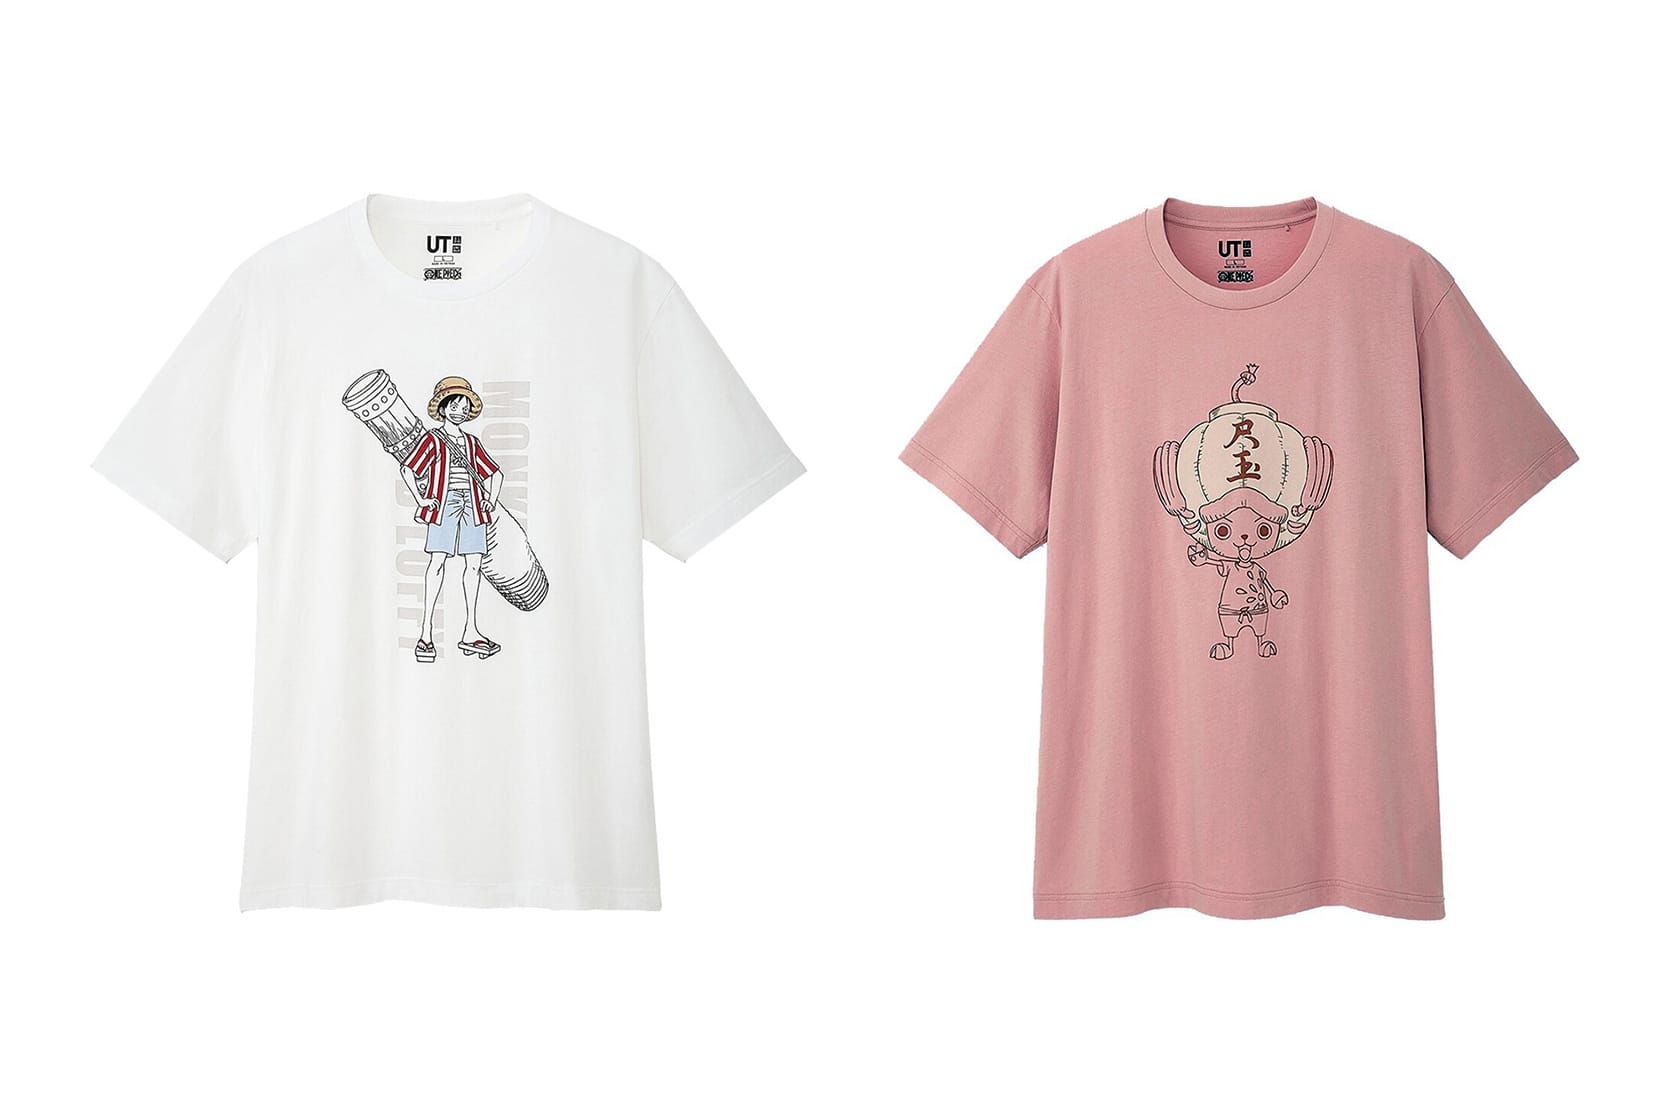 Uniqlo and The Andy Warhol Foundation Continue Collaboration